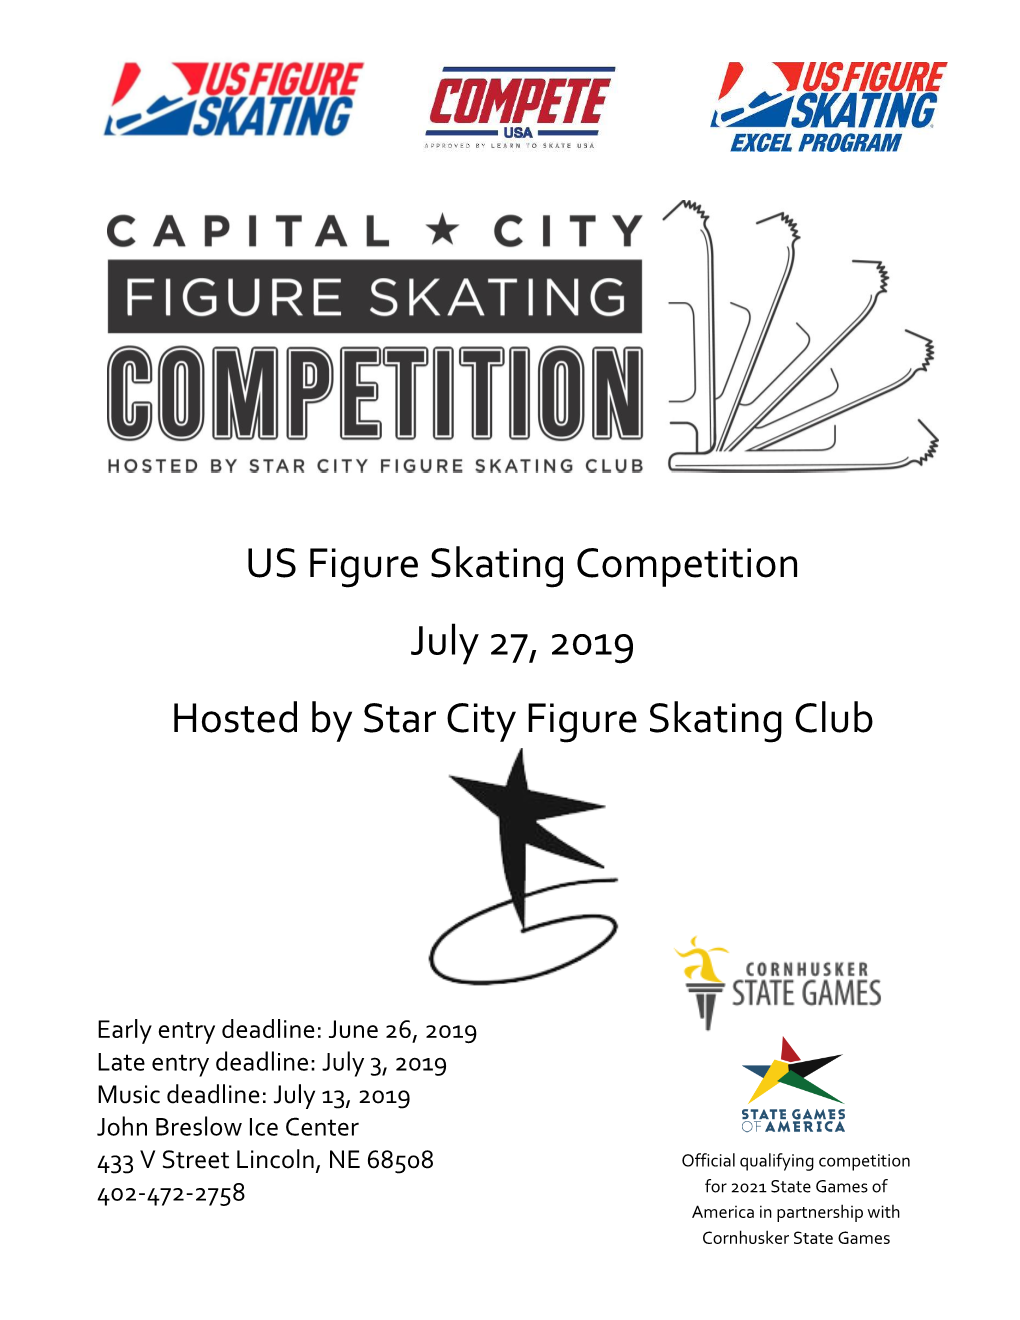 US Figure Skating Competition July 27, 2019 Hosted by Star City Figure Skating Club